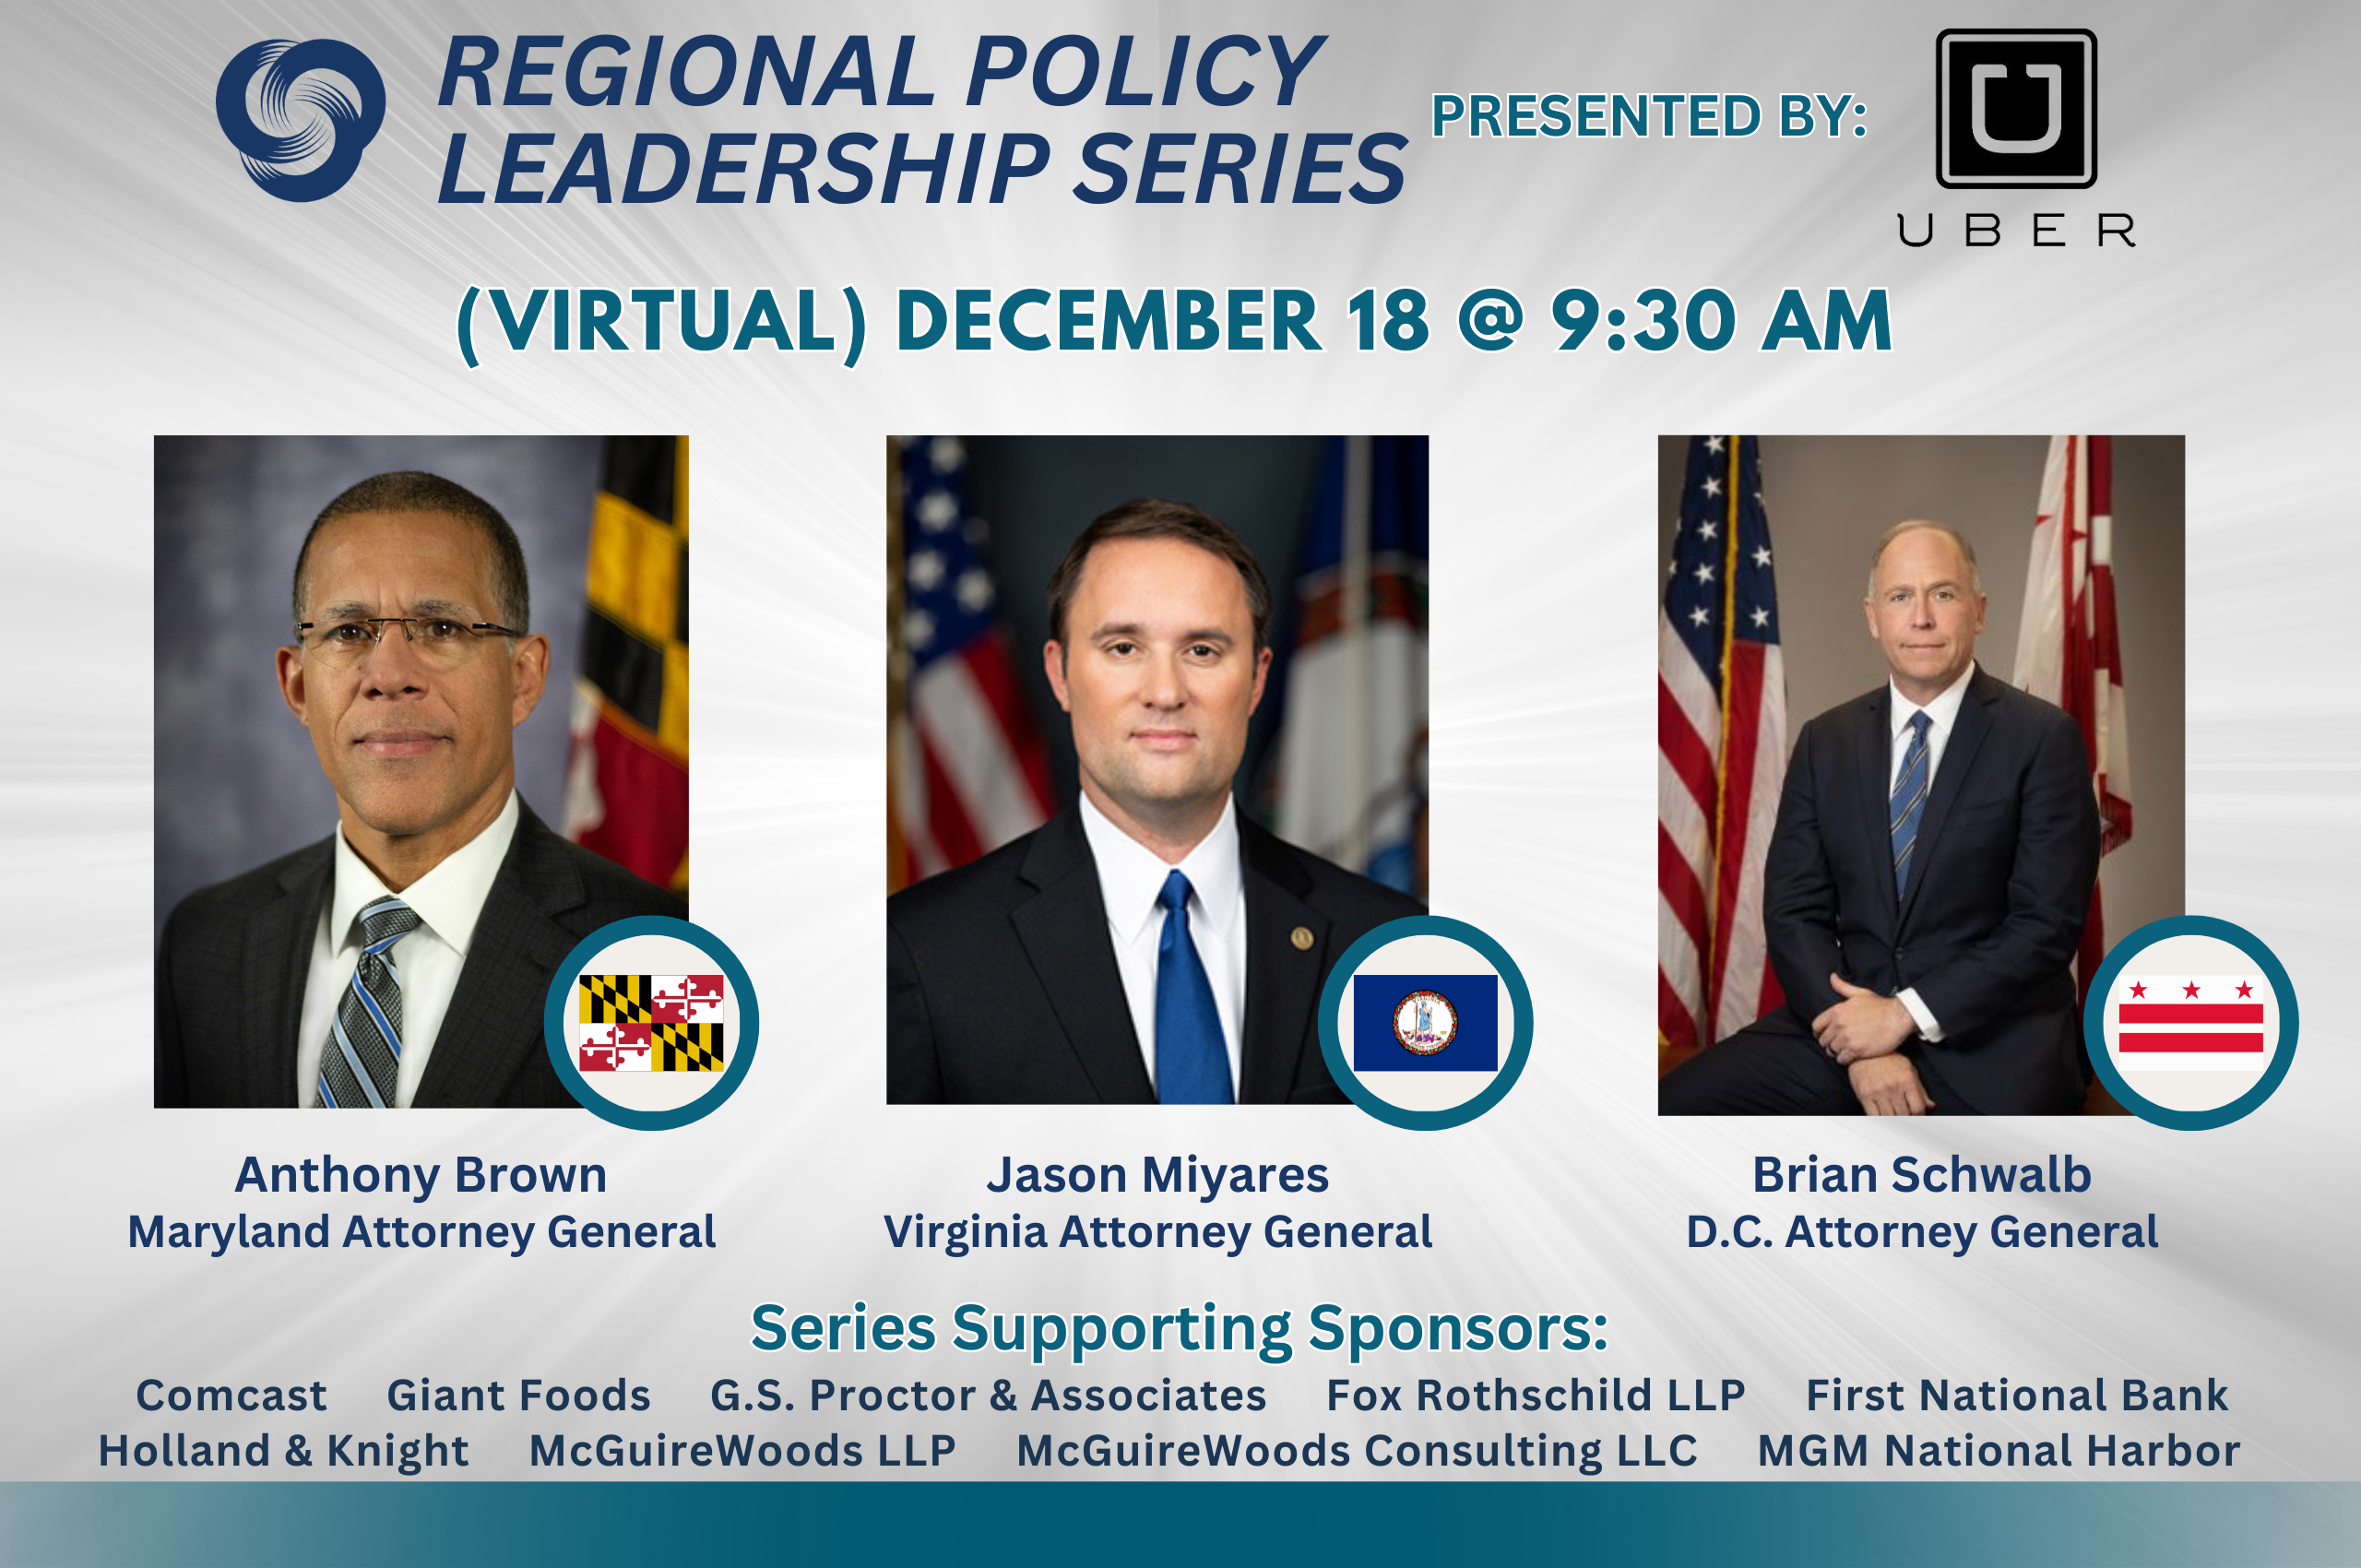 Regional Attorneys General Policy Discussion addresses Meta Lawsuit, AI Ethics, and Crime Solutions in Greater Washington 